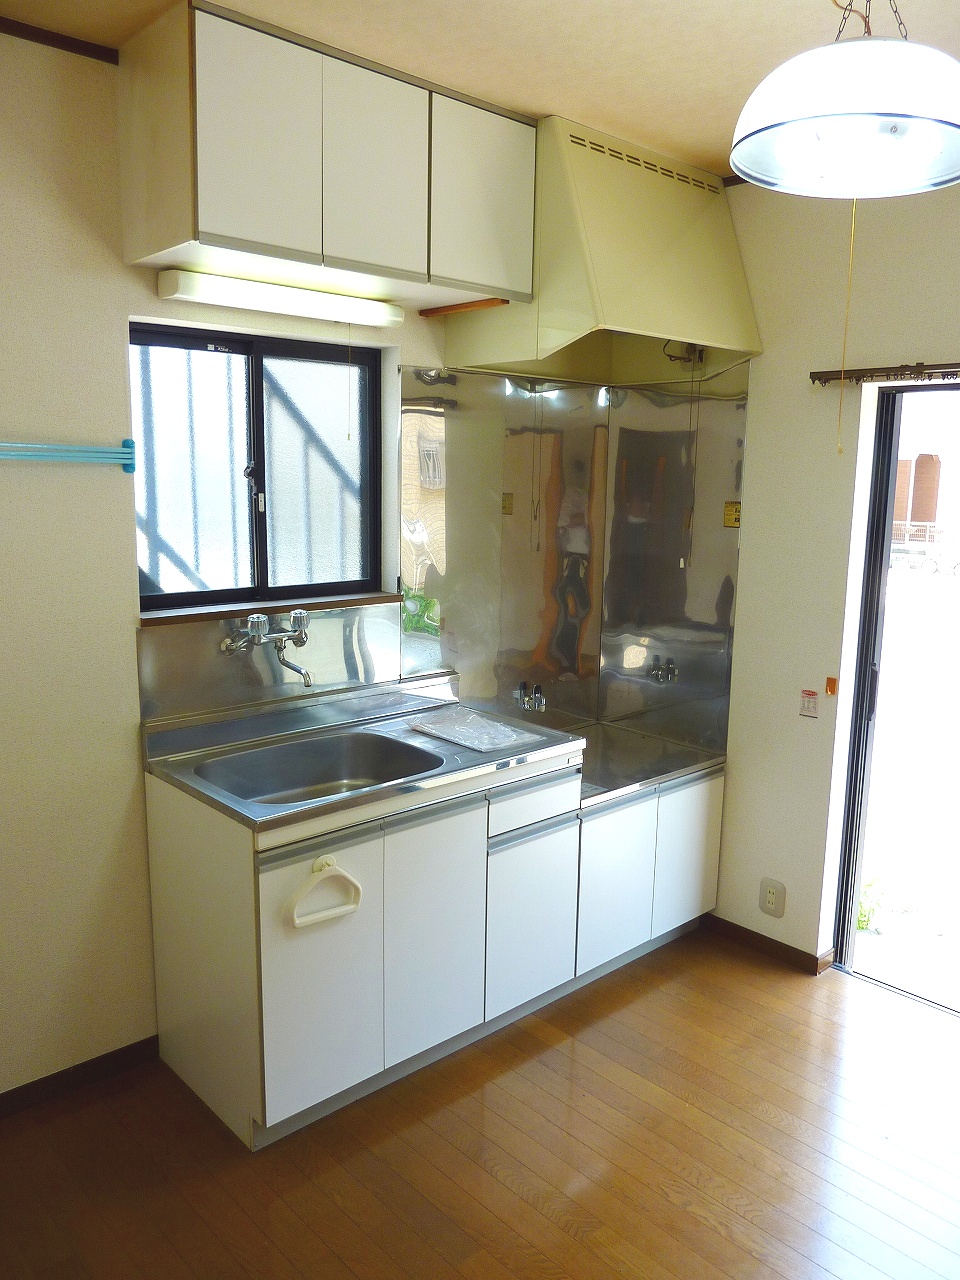 Kitchen. It is a kitchen with a small window ☆ Economic city gas ☆ 